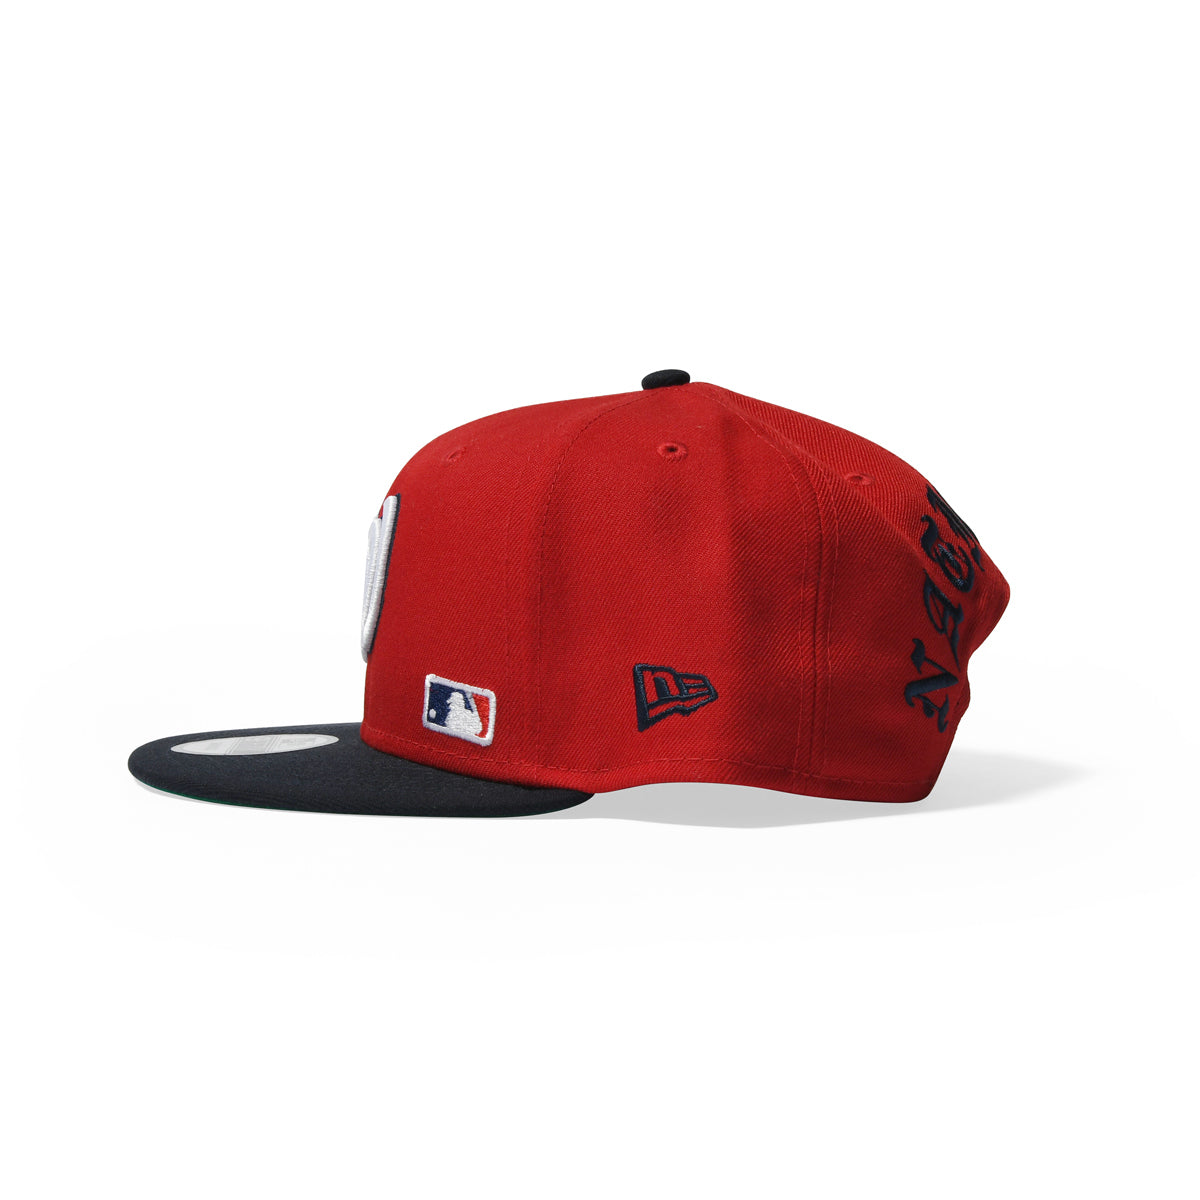 NEW ERA BlackLETTER ARCH WAS NATIONALS 9FIFTY